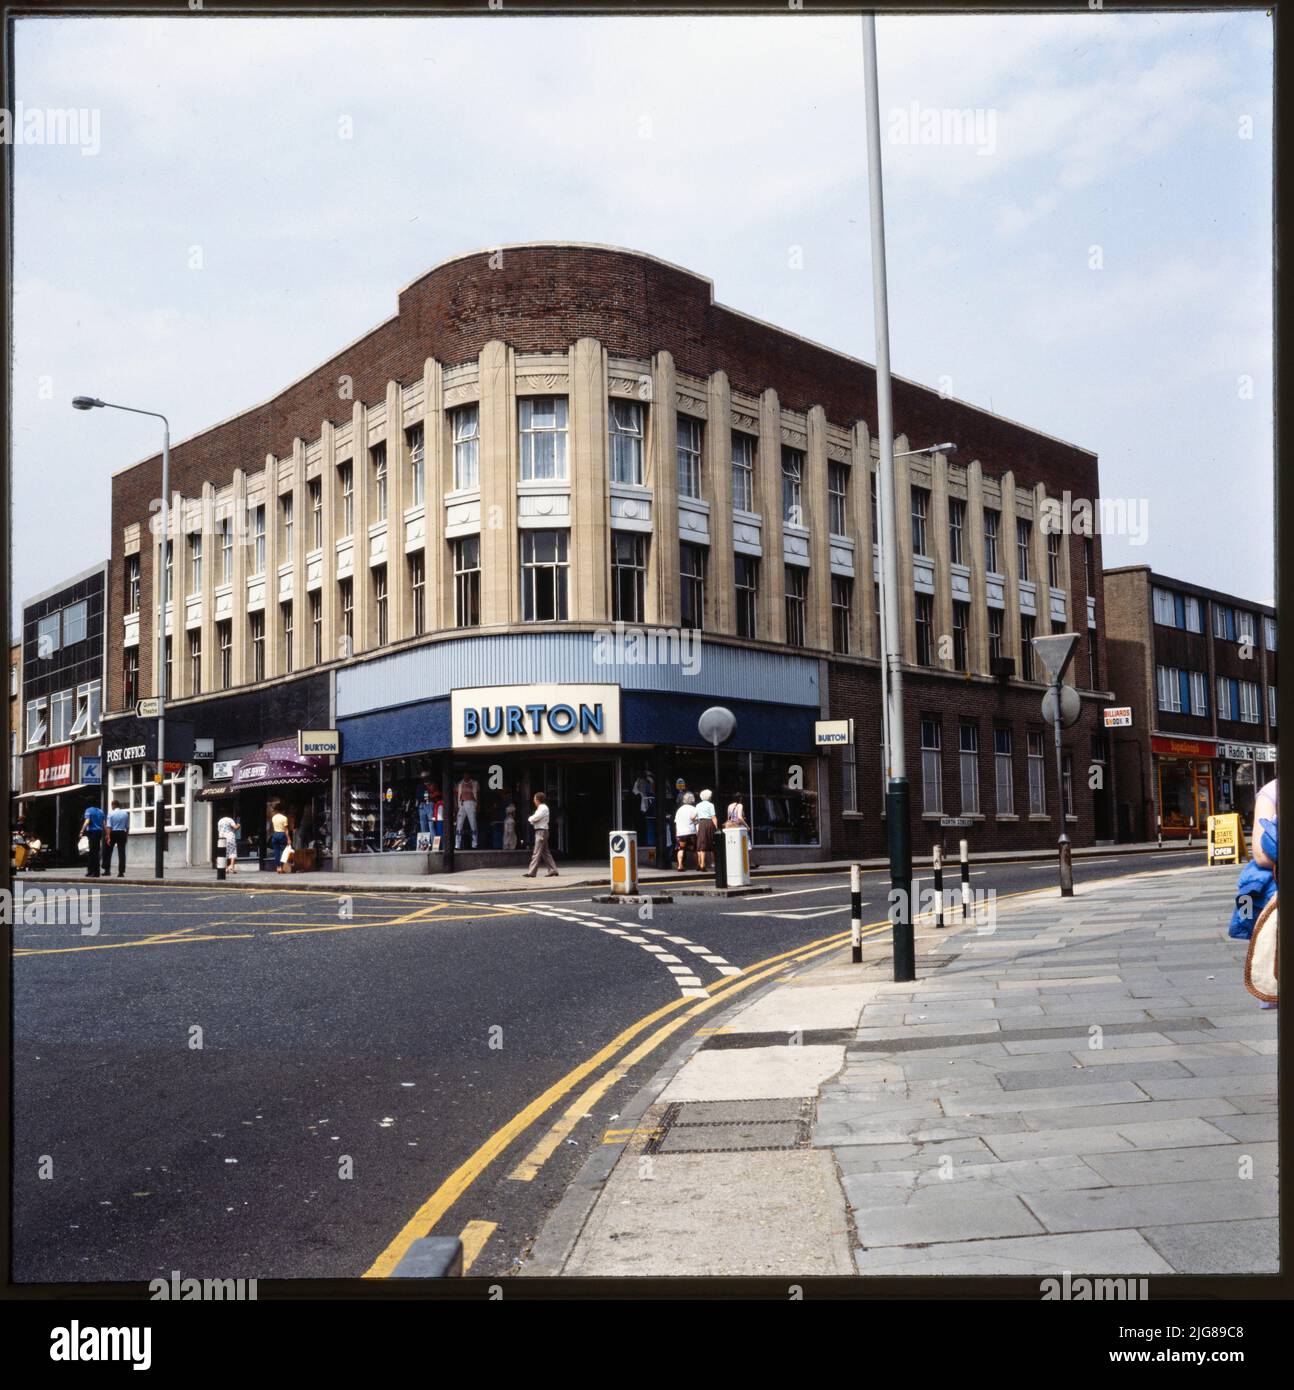 Burton, 127-133 High Street, Hornchurch, Havering, Greater London Authority, 1970s-1990s. The curved elevation of the Burton store on the corner of High Street and North Street, with the adjoining shops on either side. Foundation stones were laid at the site by members of the Burton family in 1939. The shop units in the building were occupied by businesses including the Post Office, Dollond and Aitchison Opticians, Dorothy Perkins, Douglas Estate Agents, and Boots. Stock Photo